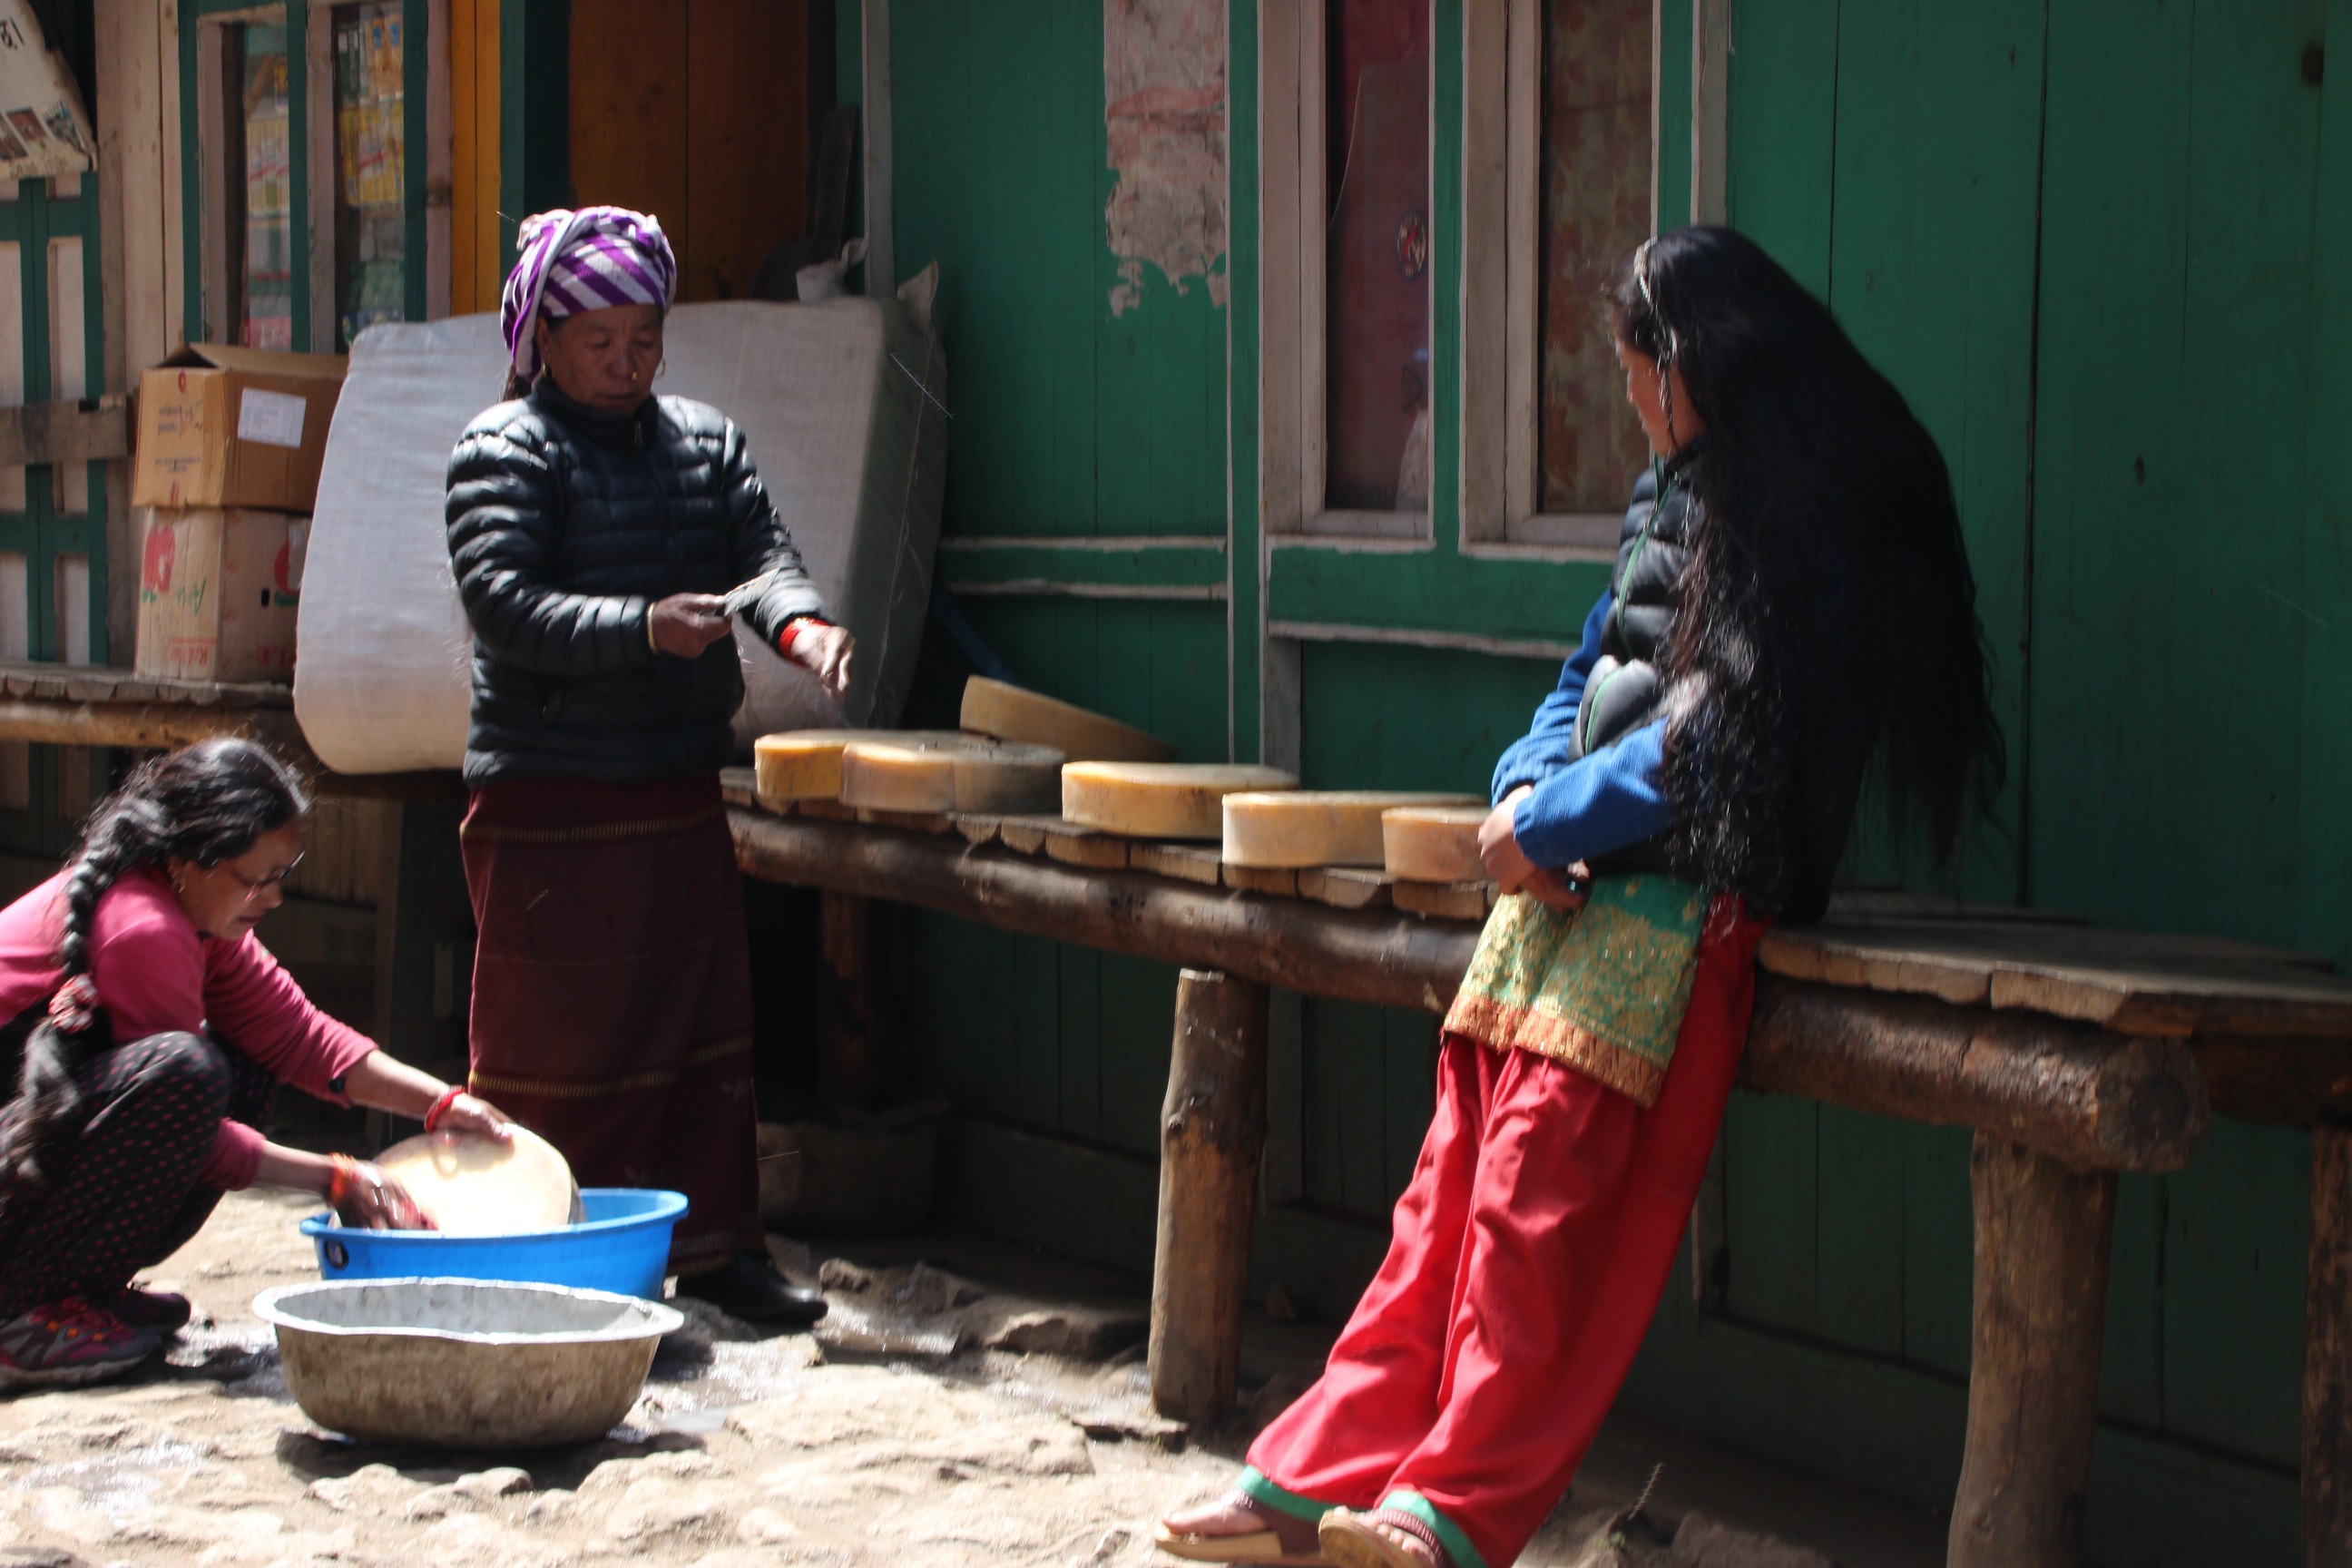 Often when referencing Sherpa, the focus tend to be on men. However, women also remain active taking care of their households but also bringing income from local produce such as yak cheese: forming, cutting and washing the final product before it can be sold. 